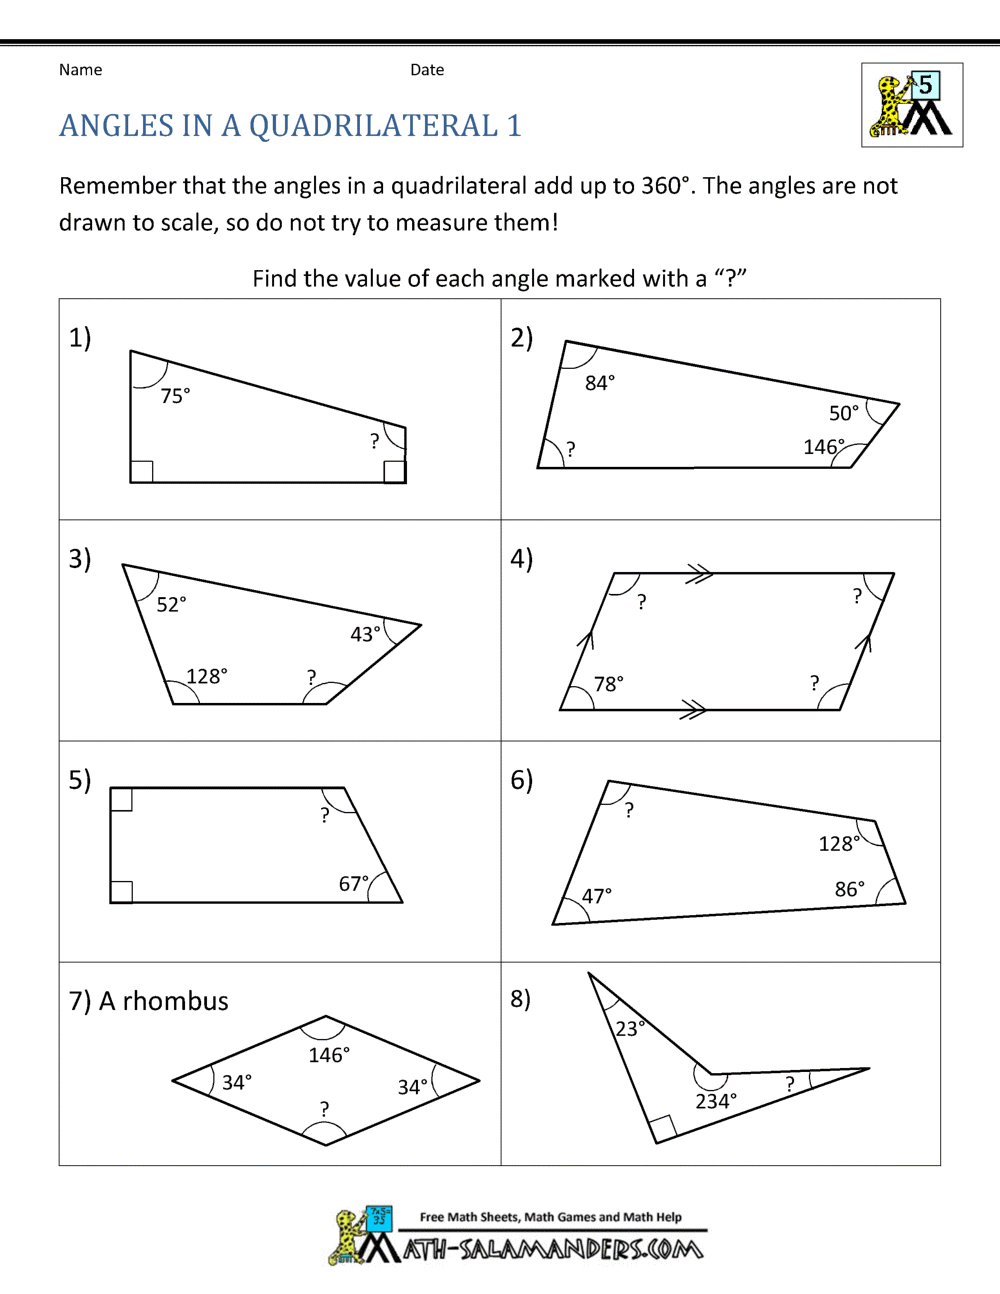 22th Grade Geometry Inside Angles Of Polygon Worksheet